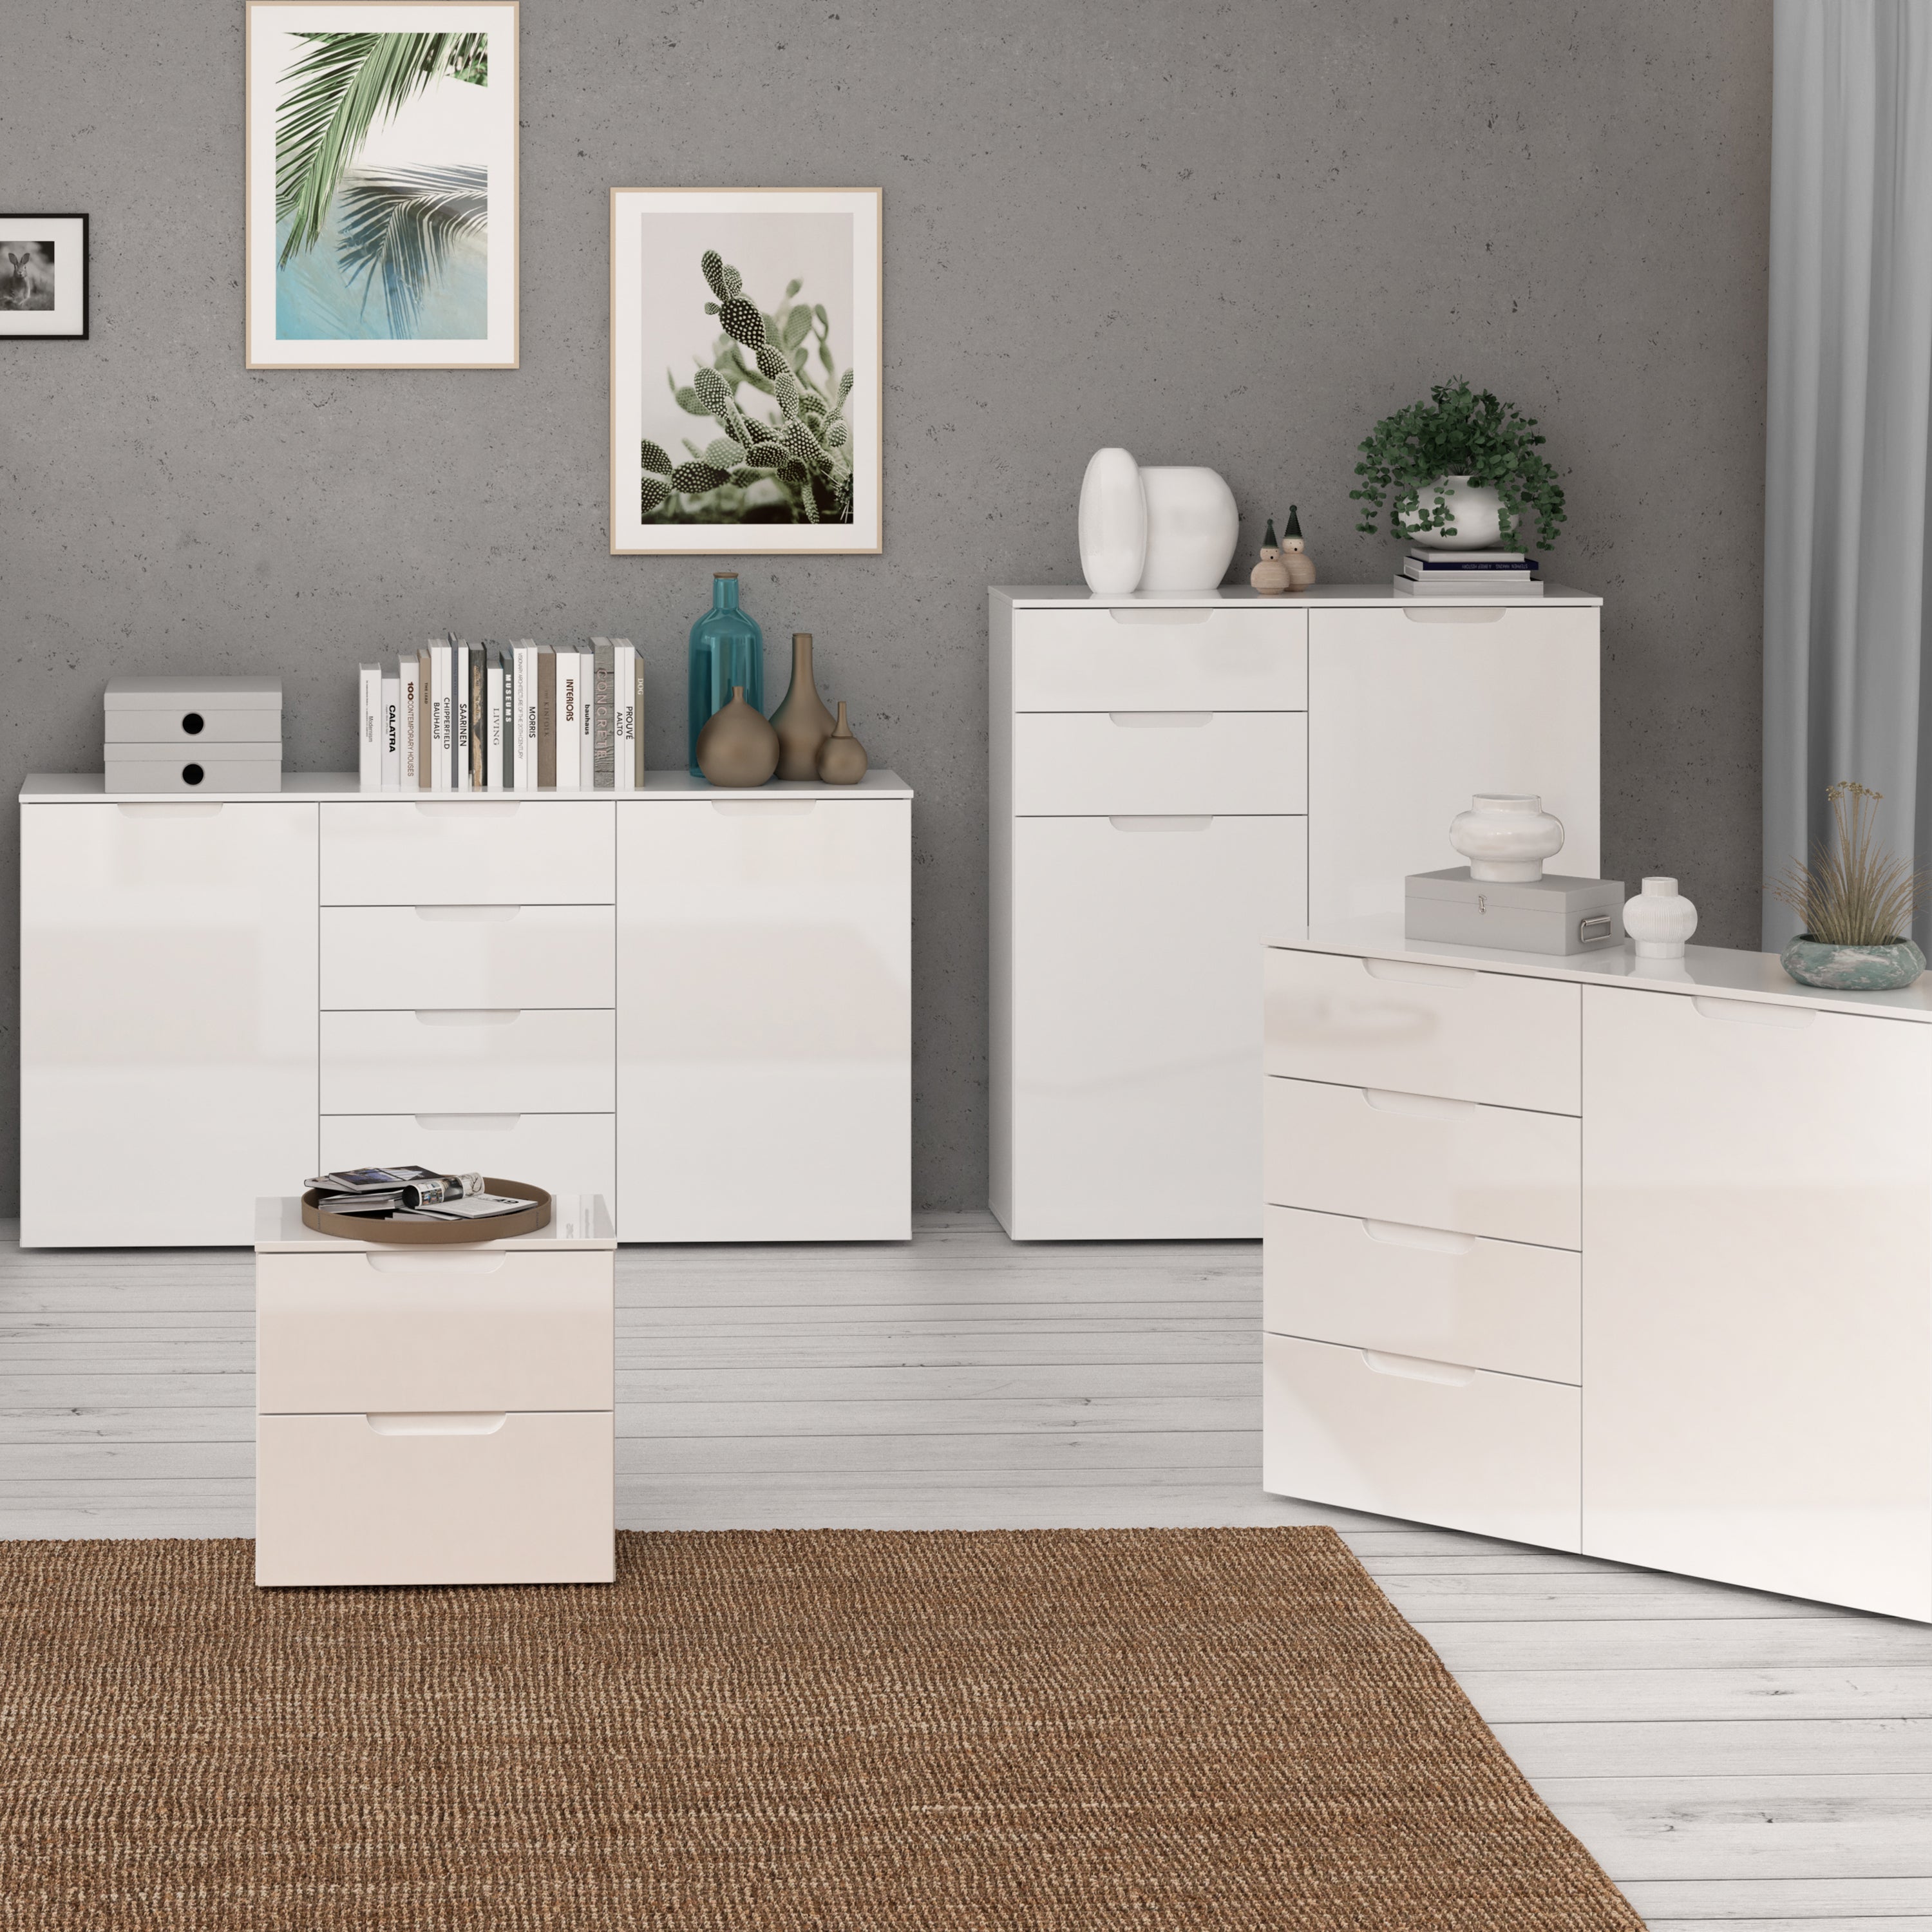 Sienna Chest of Drawers in White/White High Gloss